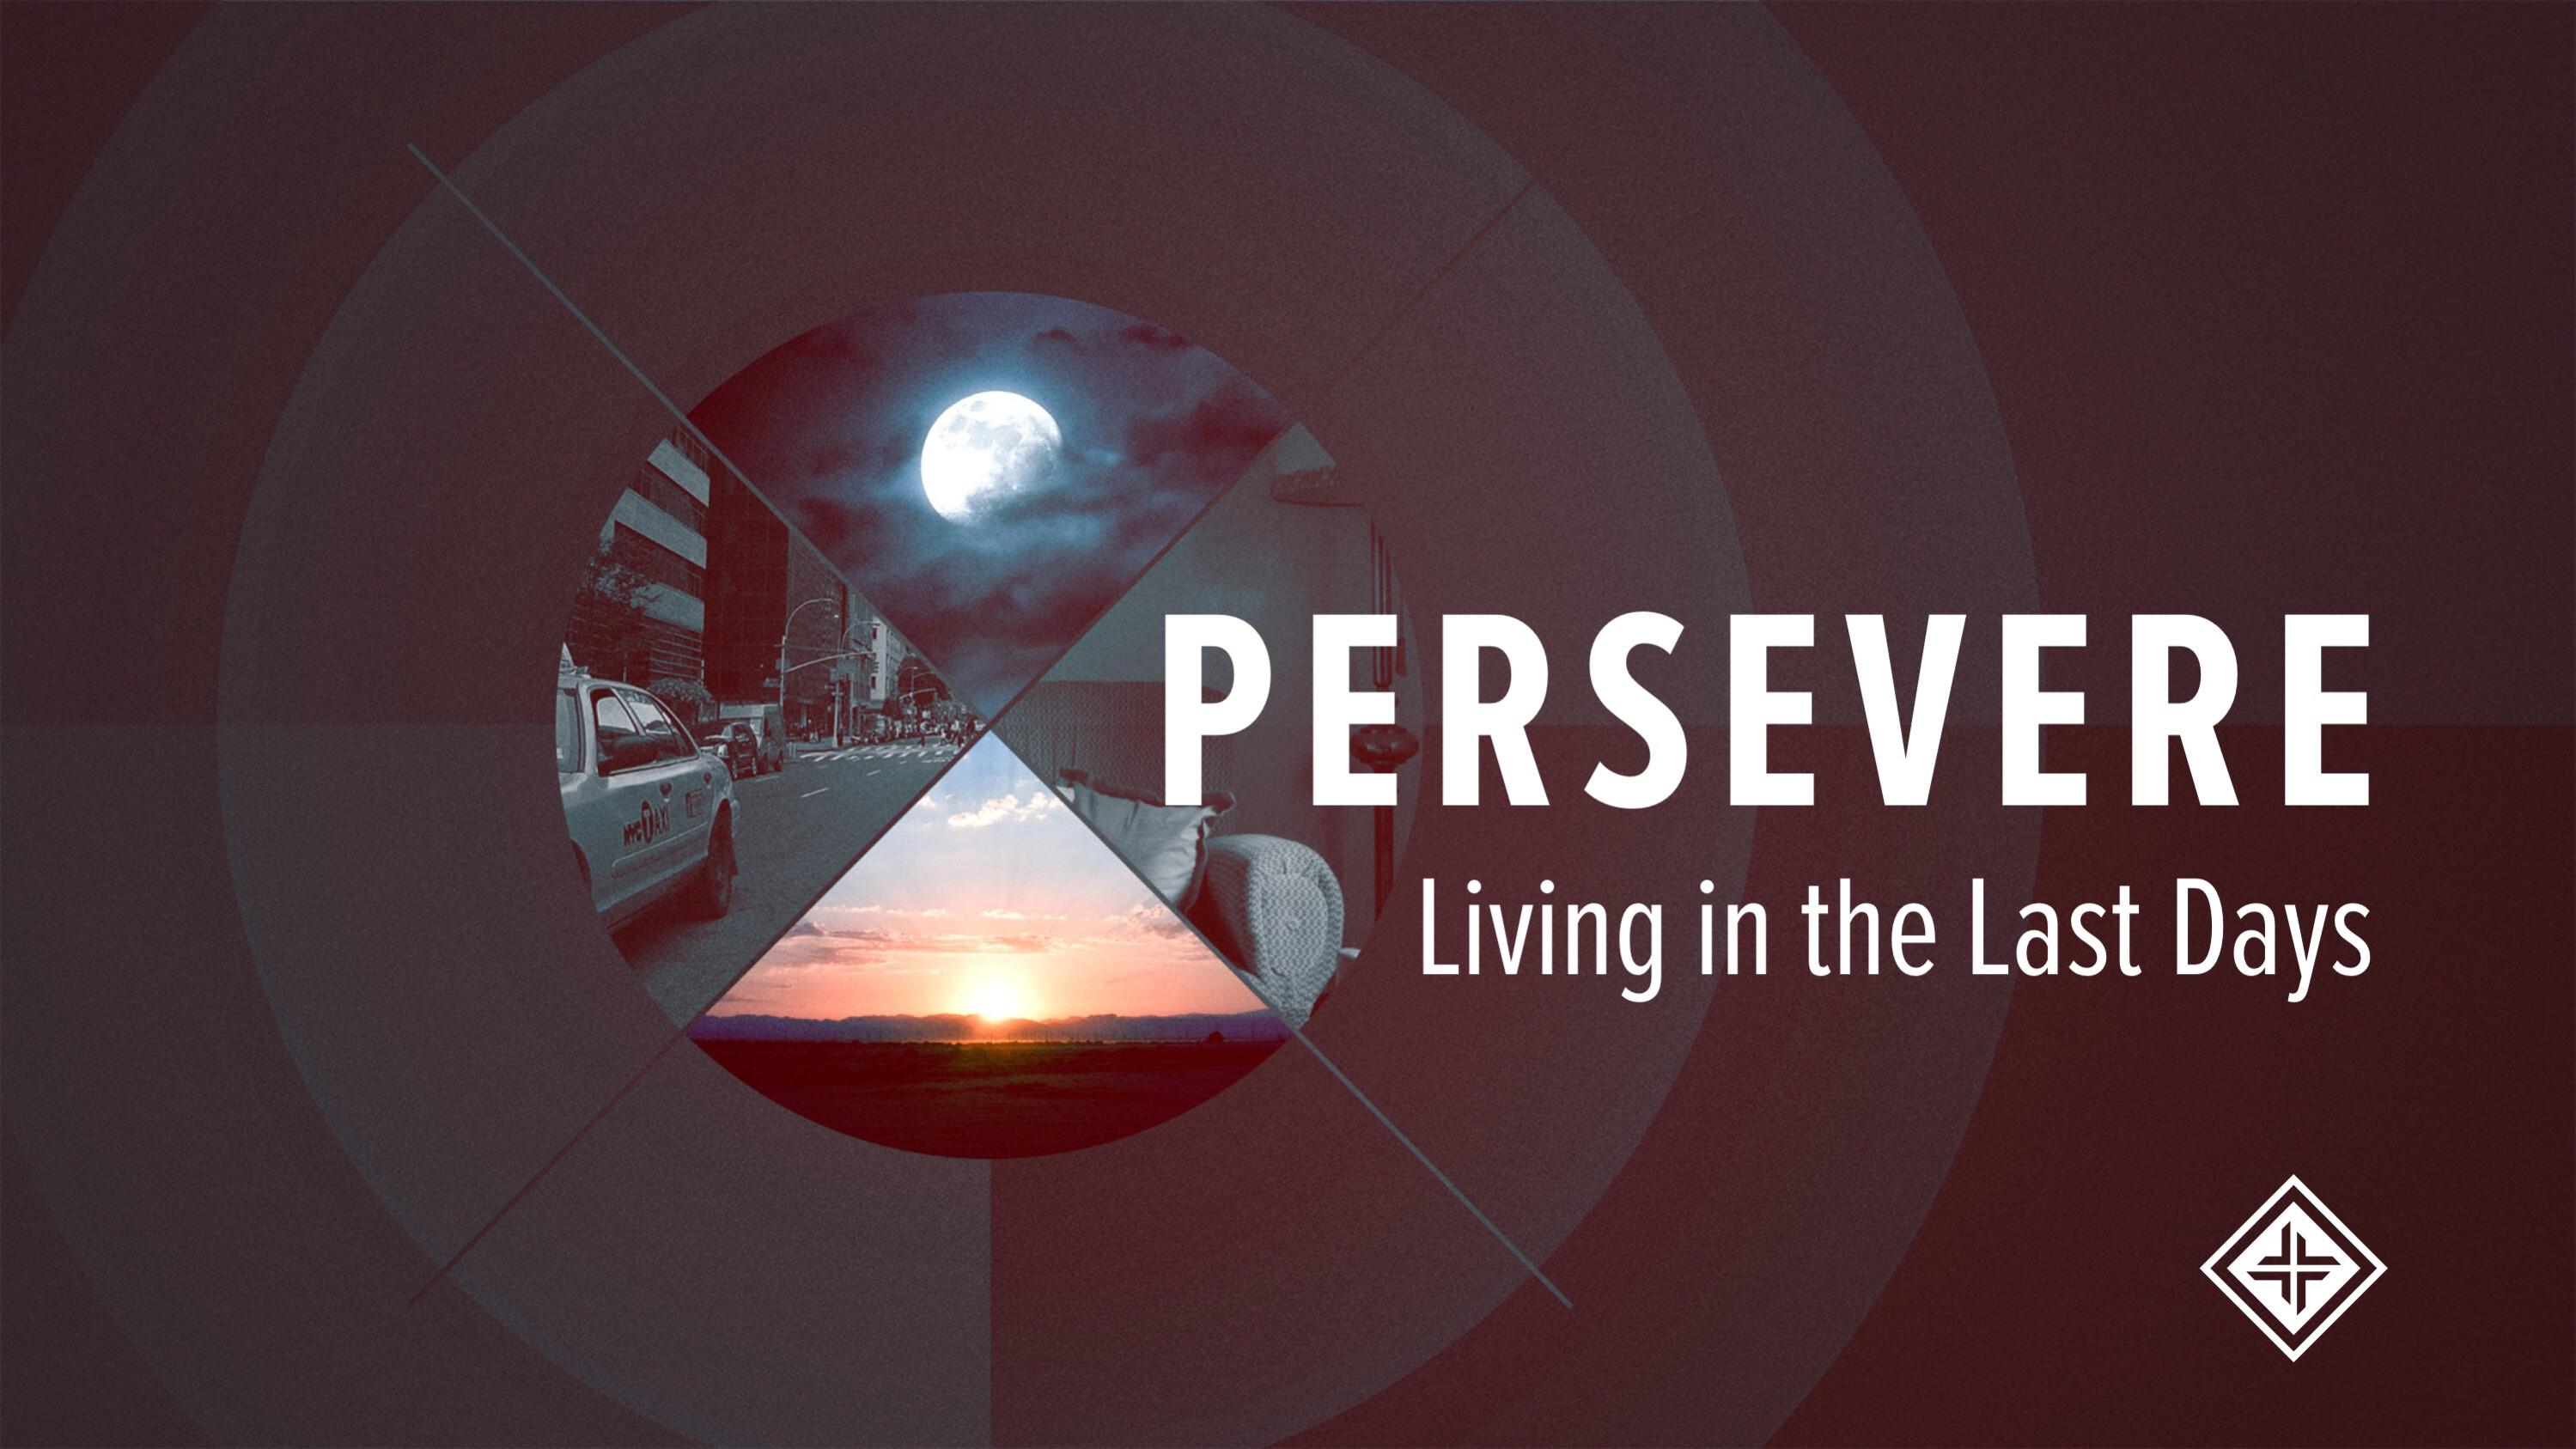 Persevere: Living in the Last Days